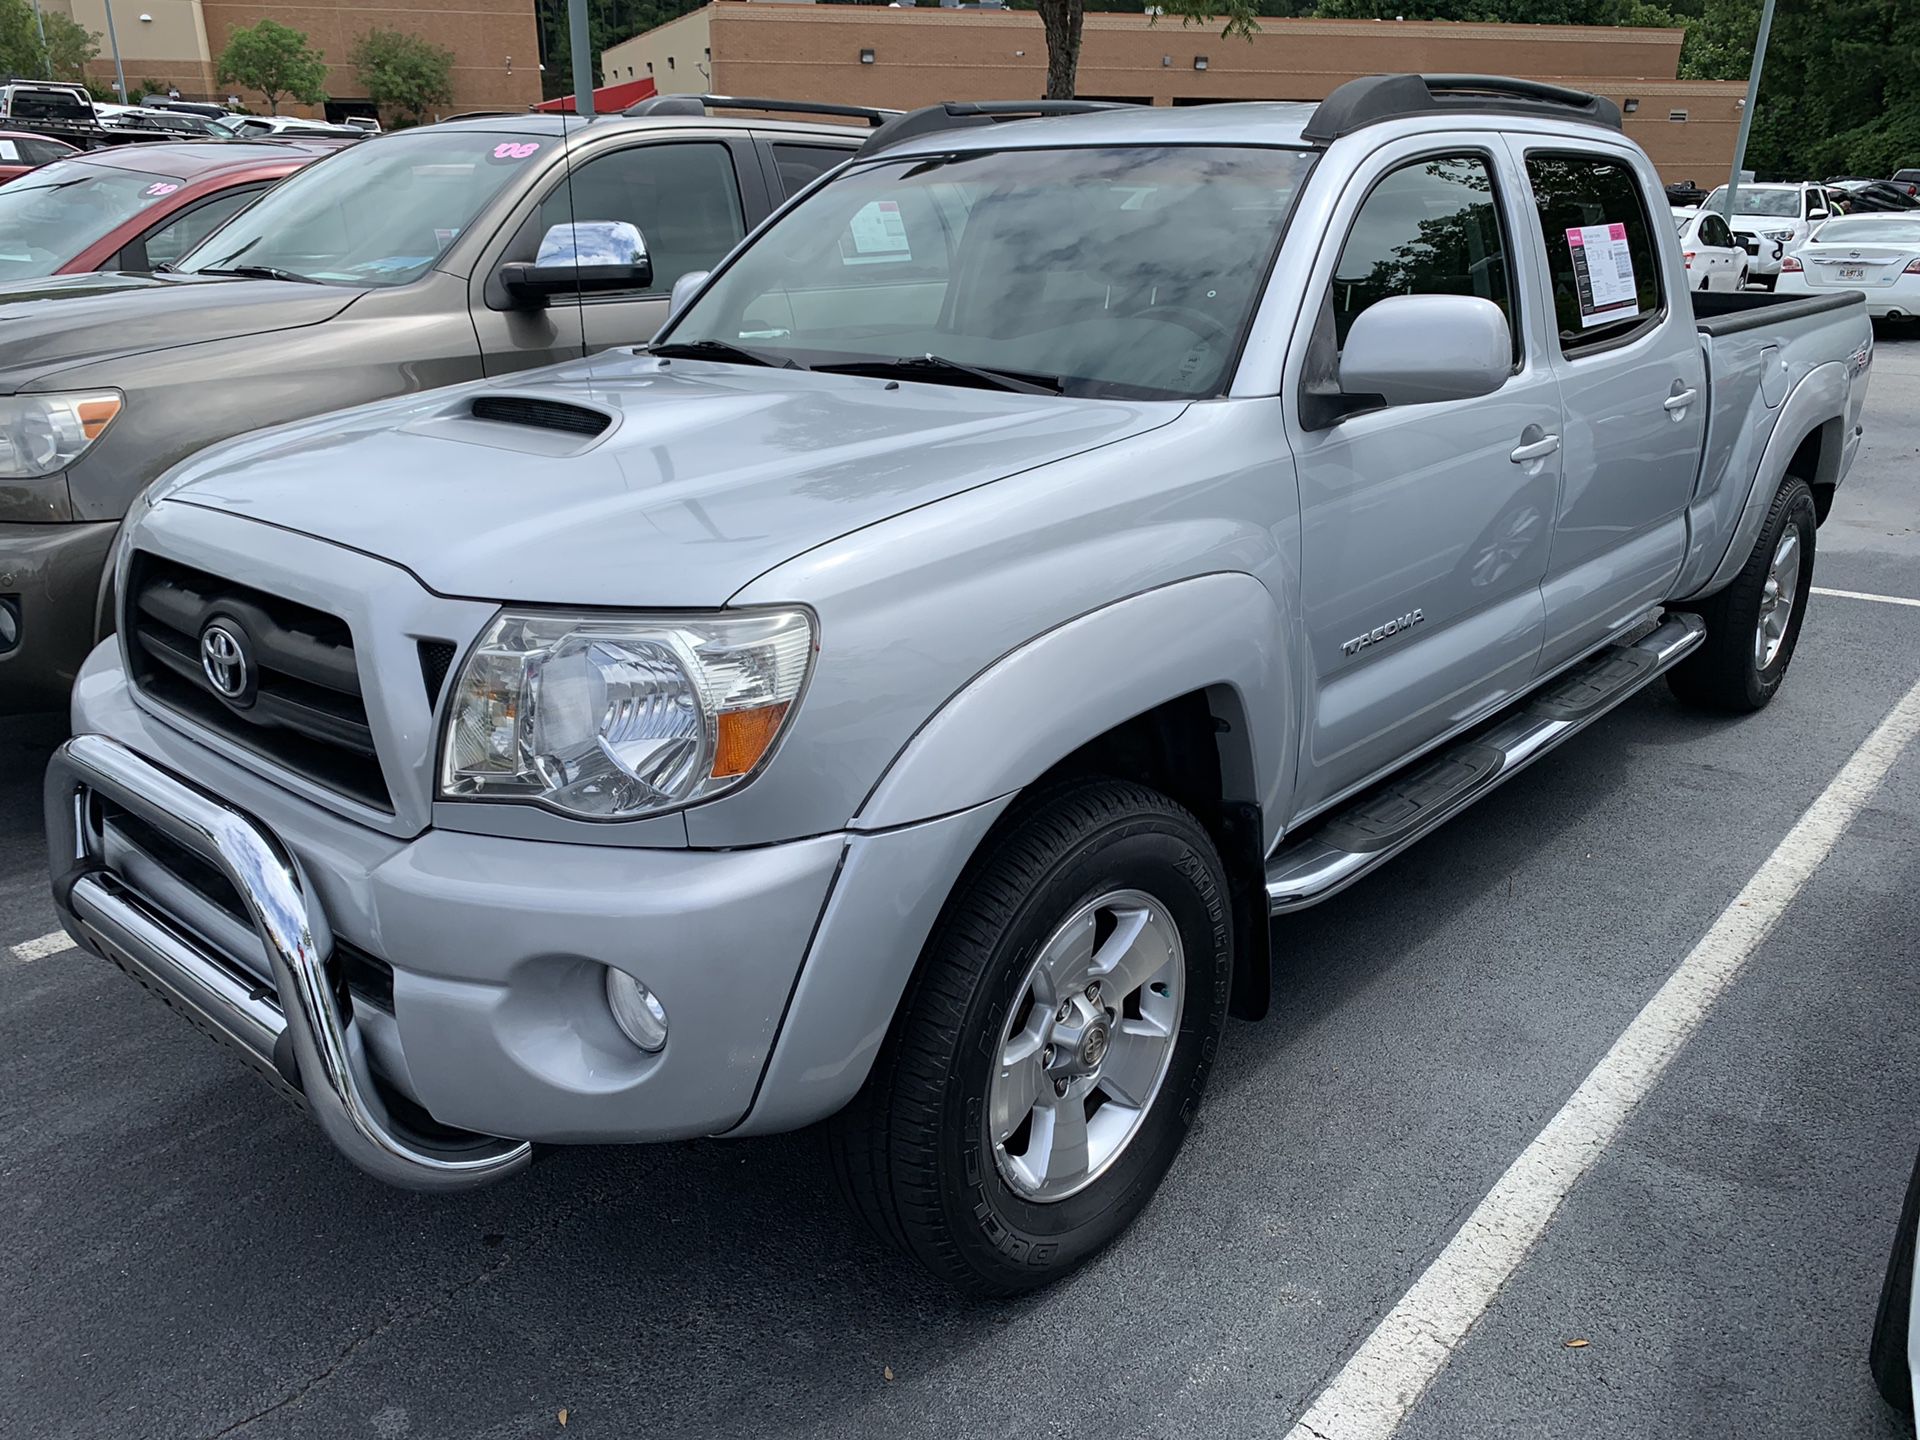 Toyota Tacoma PreRunner 2005. Take it to your house with SSN or Tax ID, Driver License and just $1000 / Llévatela a tu casa con tan solo el Social Se